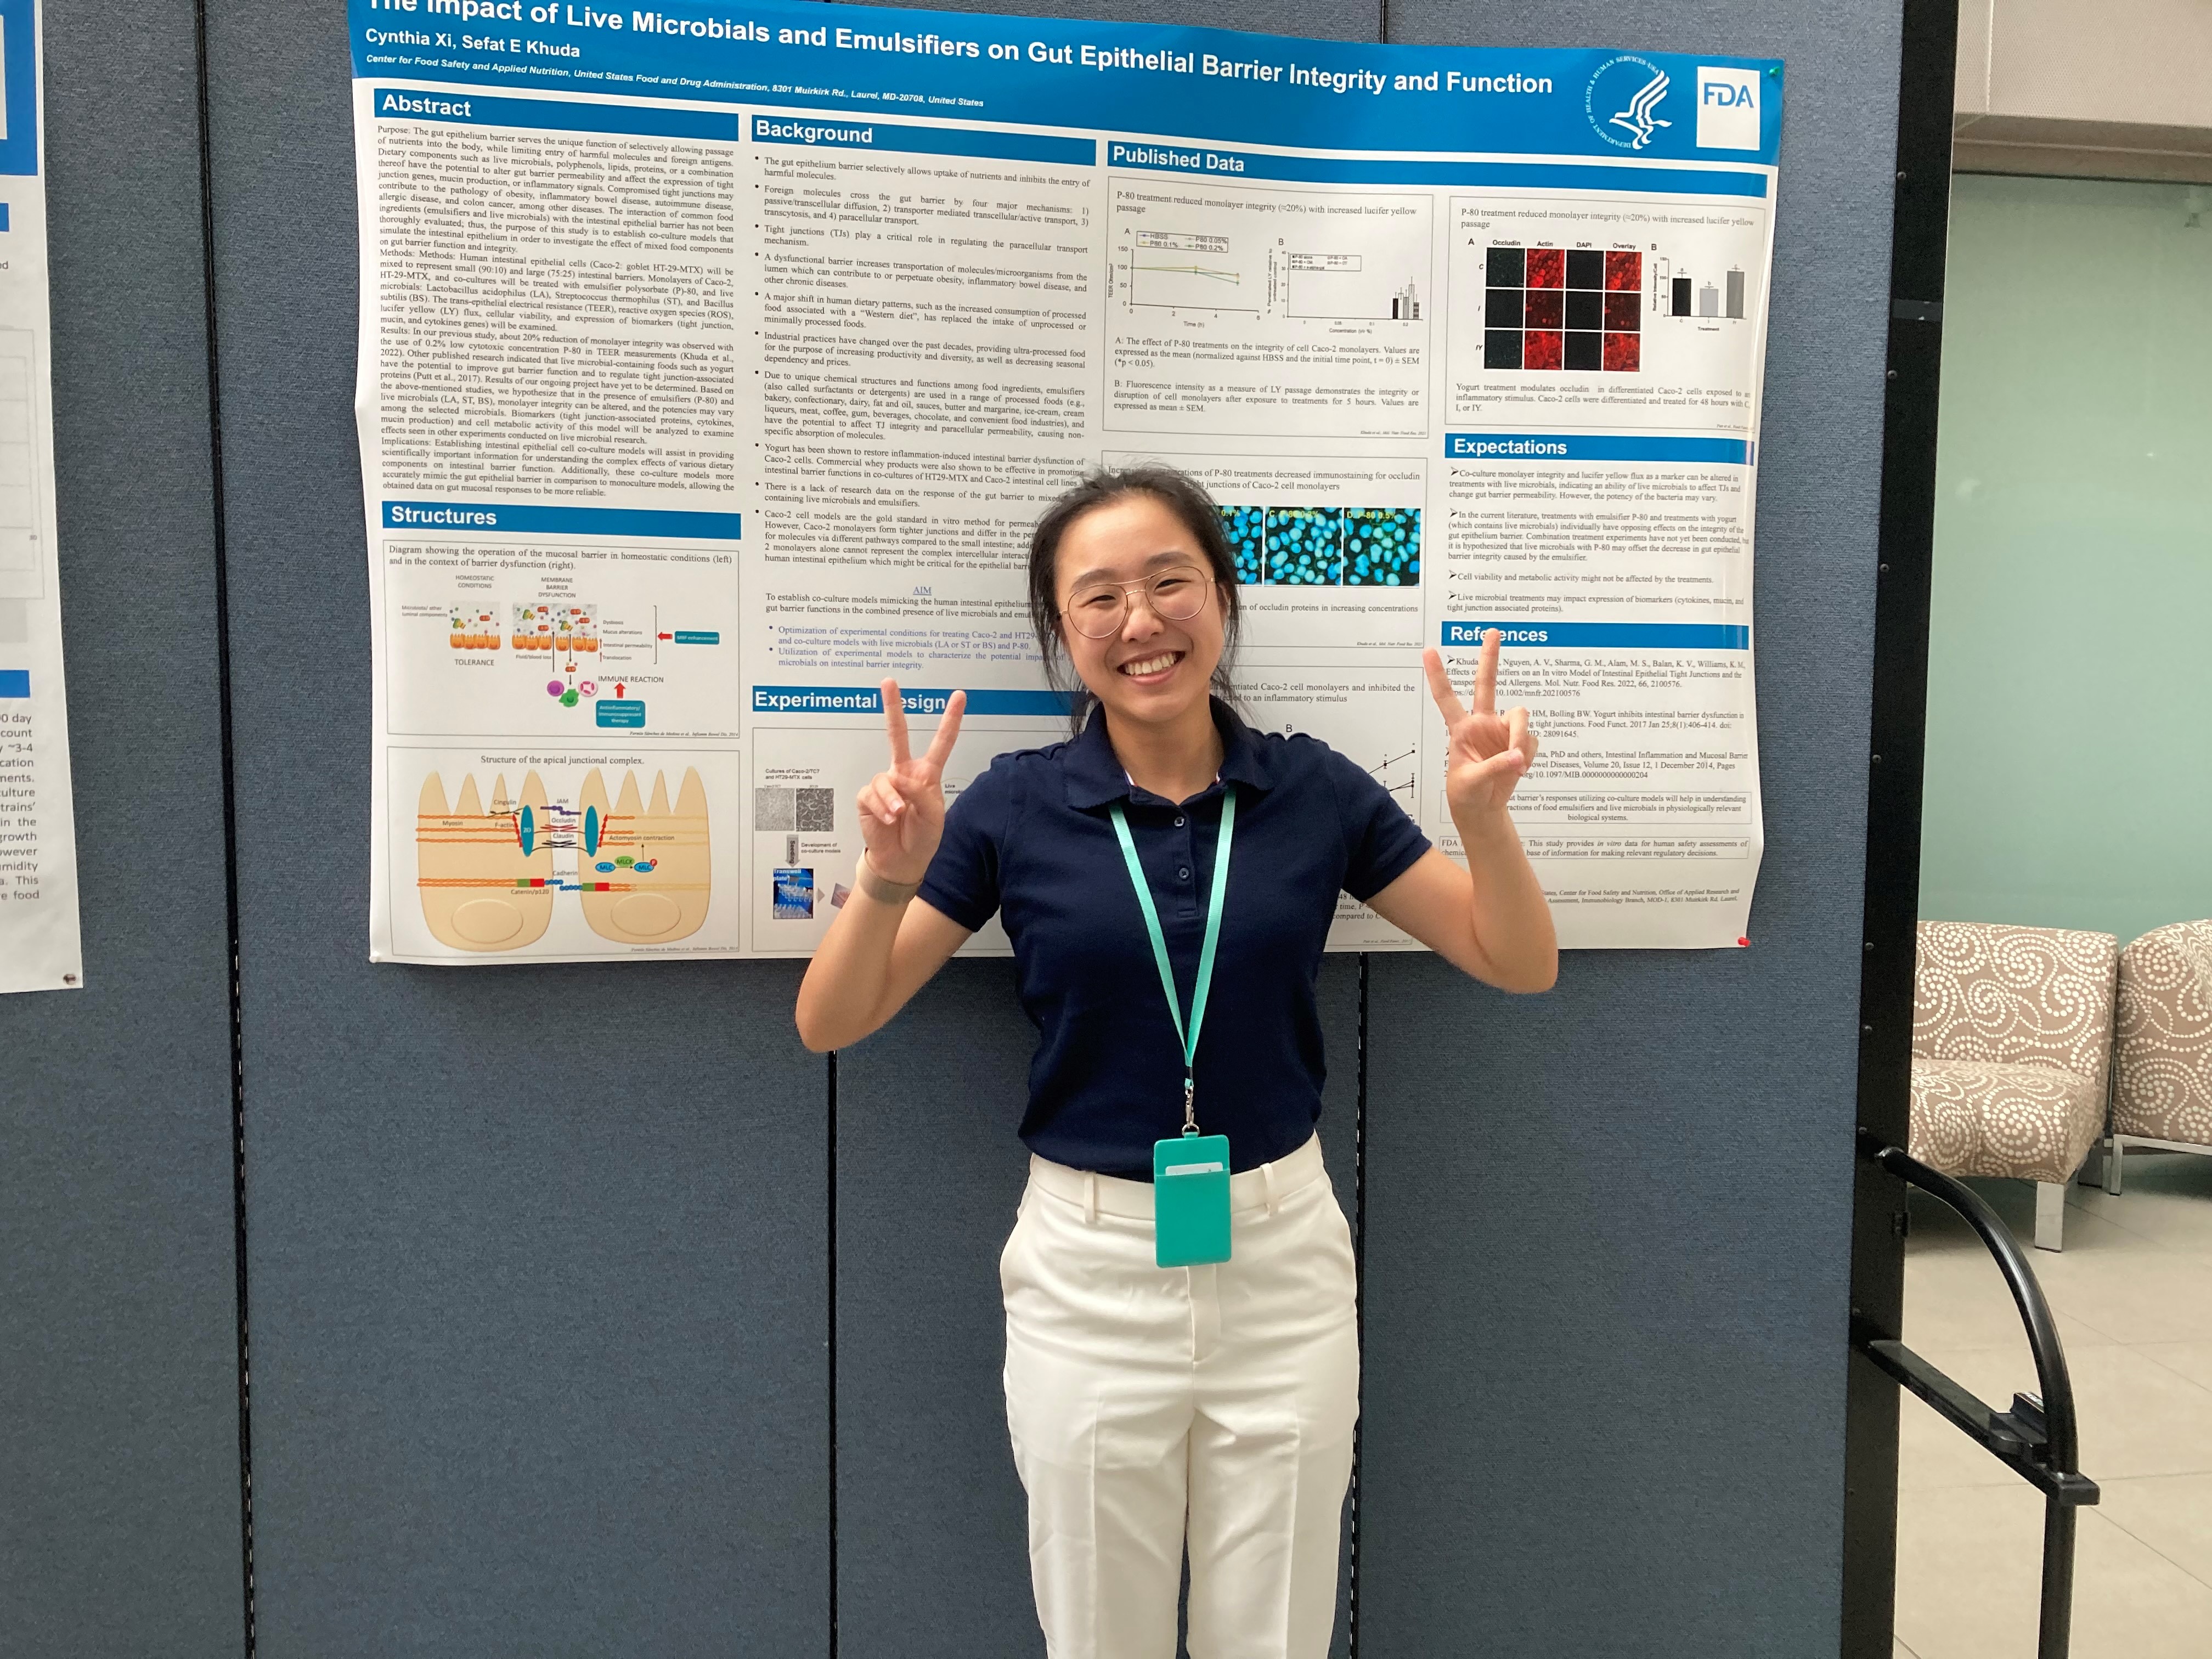 Cynthia Xi with her poster: The Impact of Live Microbials and Emulsifiers on Gut Epithelial Barrier Integrity and Function.